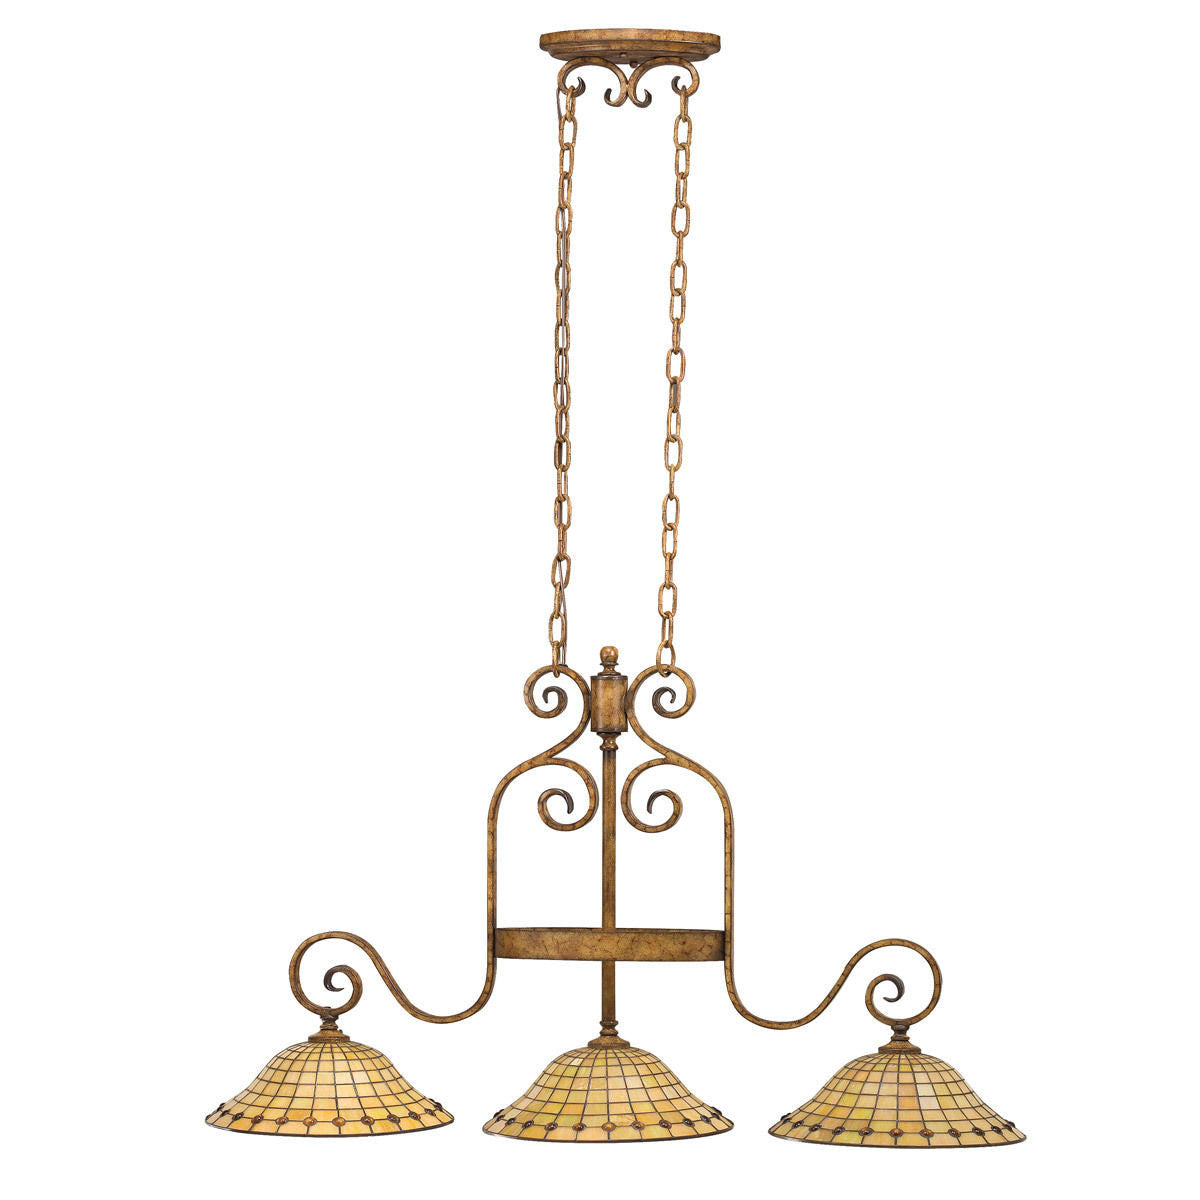 Aztec 34971 by Kichler Lighting Westerly Collection Three Light Hanging Island Chandelier in Mottled Pecan Finish